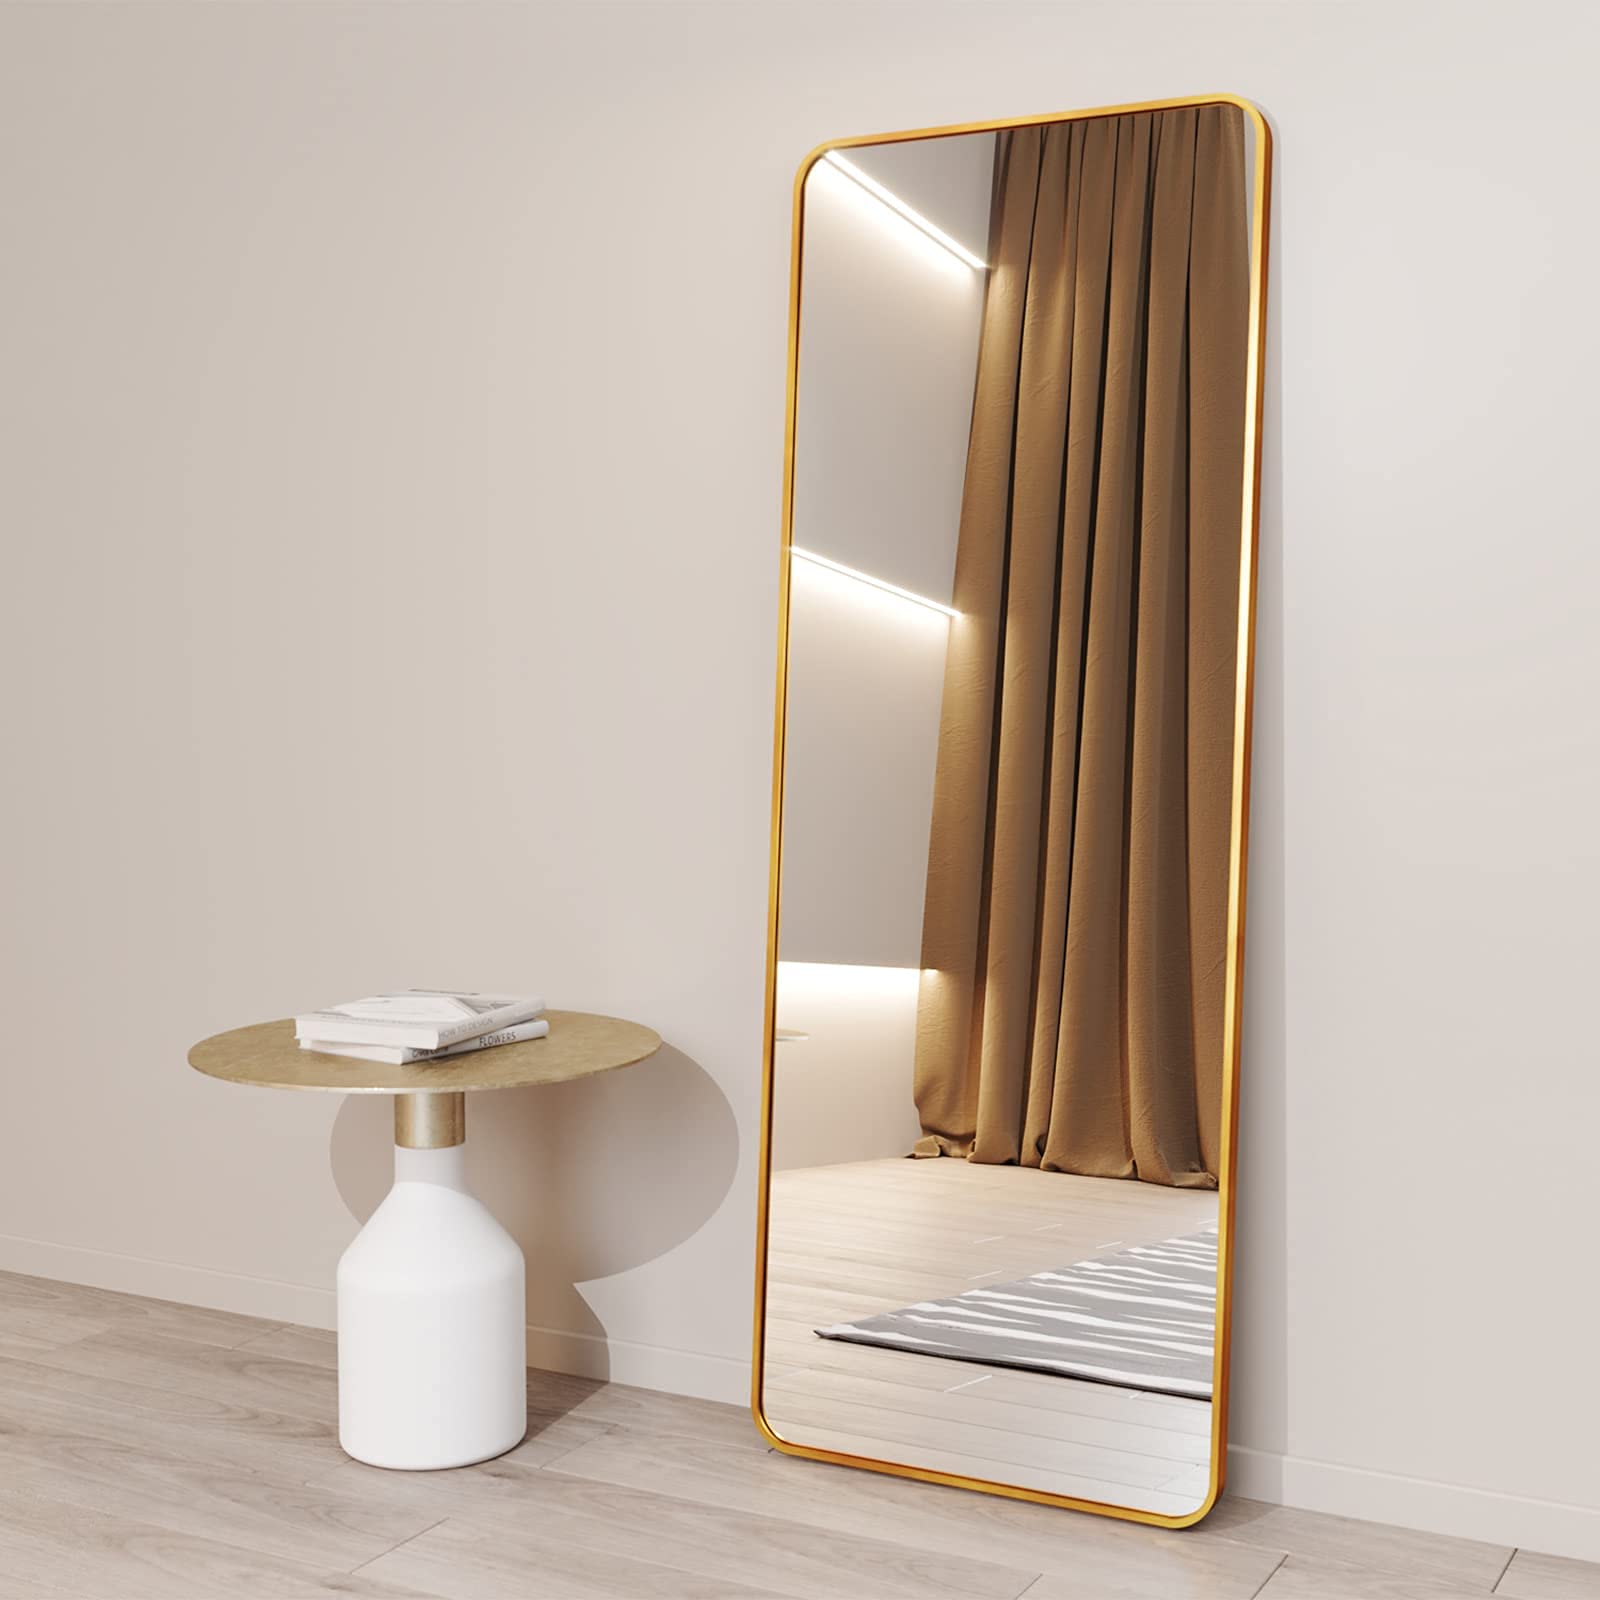 BEAUTYPEAK Gold Full Length Mirror, Rounded Floor Mirror Standing Hanging or Leaning Against Wall Dressing Room Mirror Full Length, 60"x20"